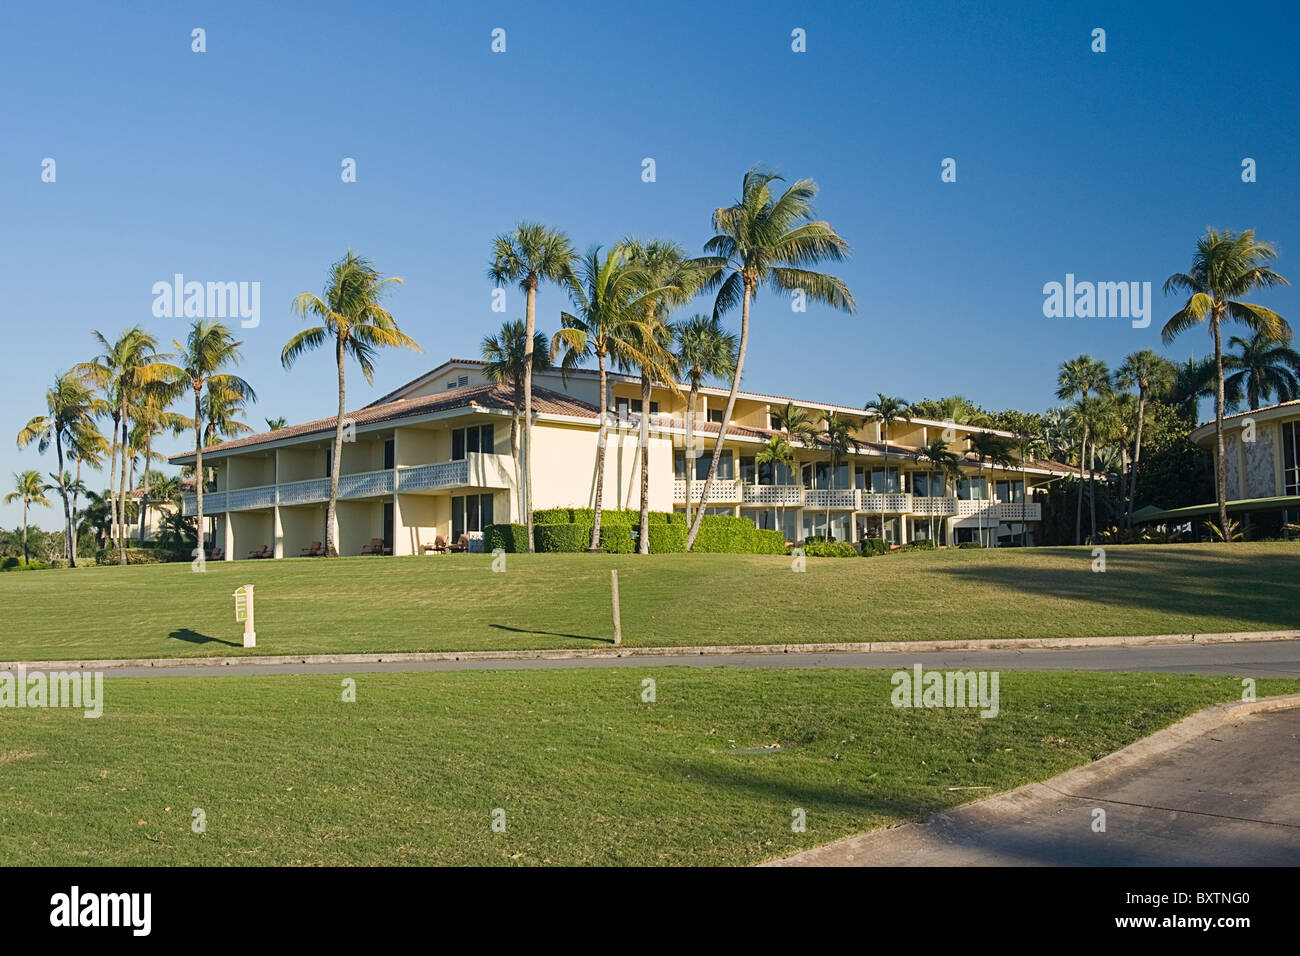 Marriott Doral Golf Resort & Spa , Miami , Florida , USA , hotel annex of rooms or villas with balconies & palm trees Stock Photo